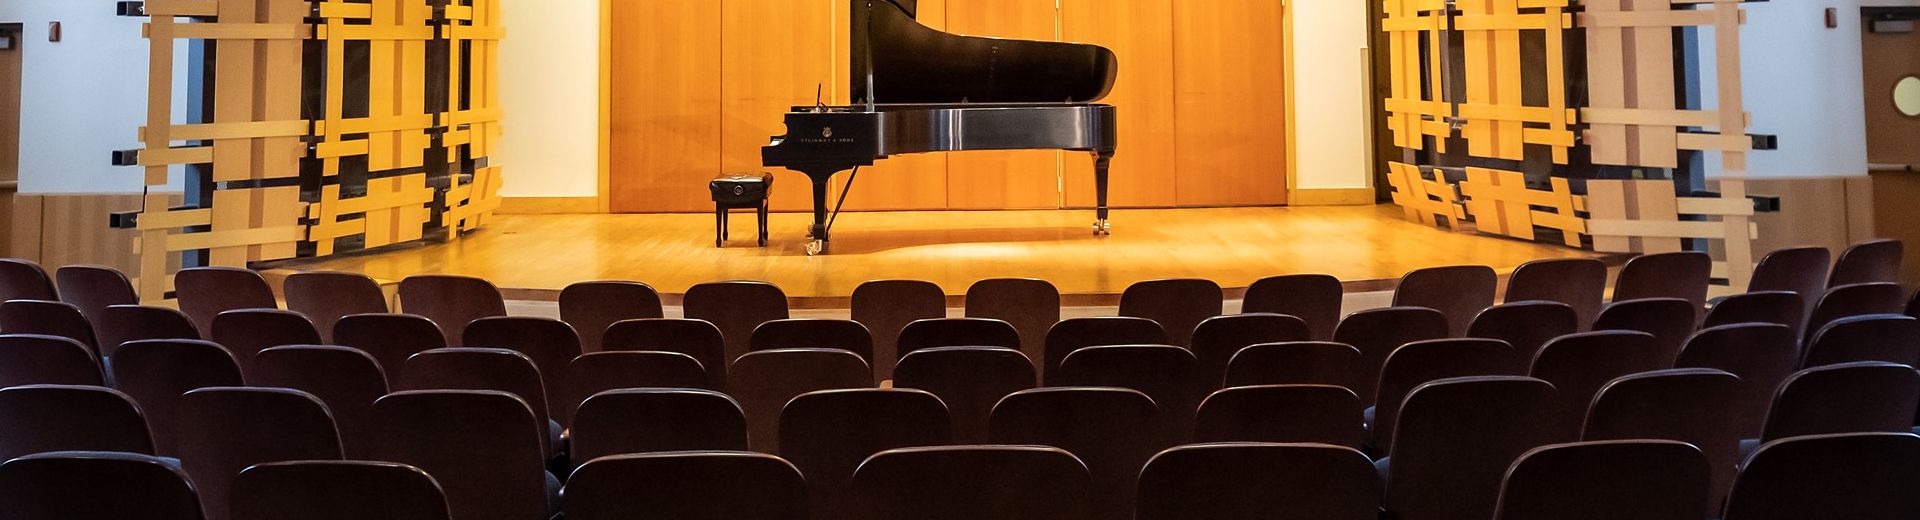 An unattended piano on a stage in an empty auditorium. 